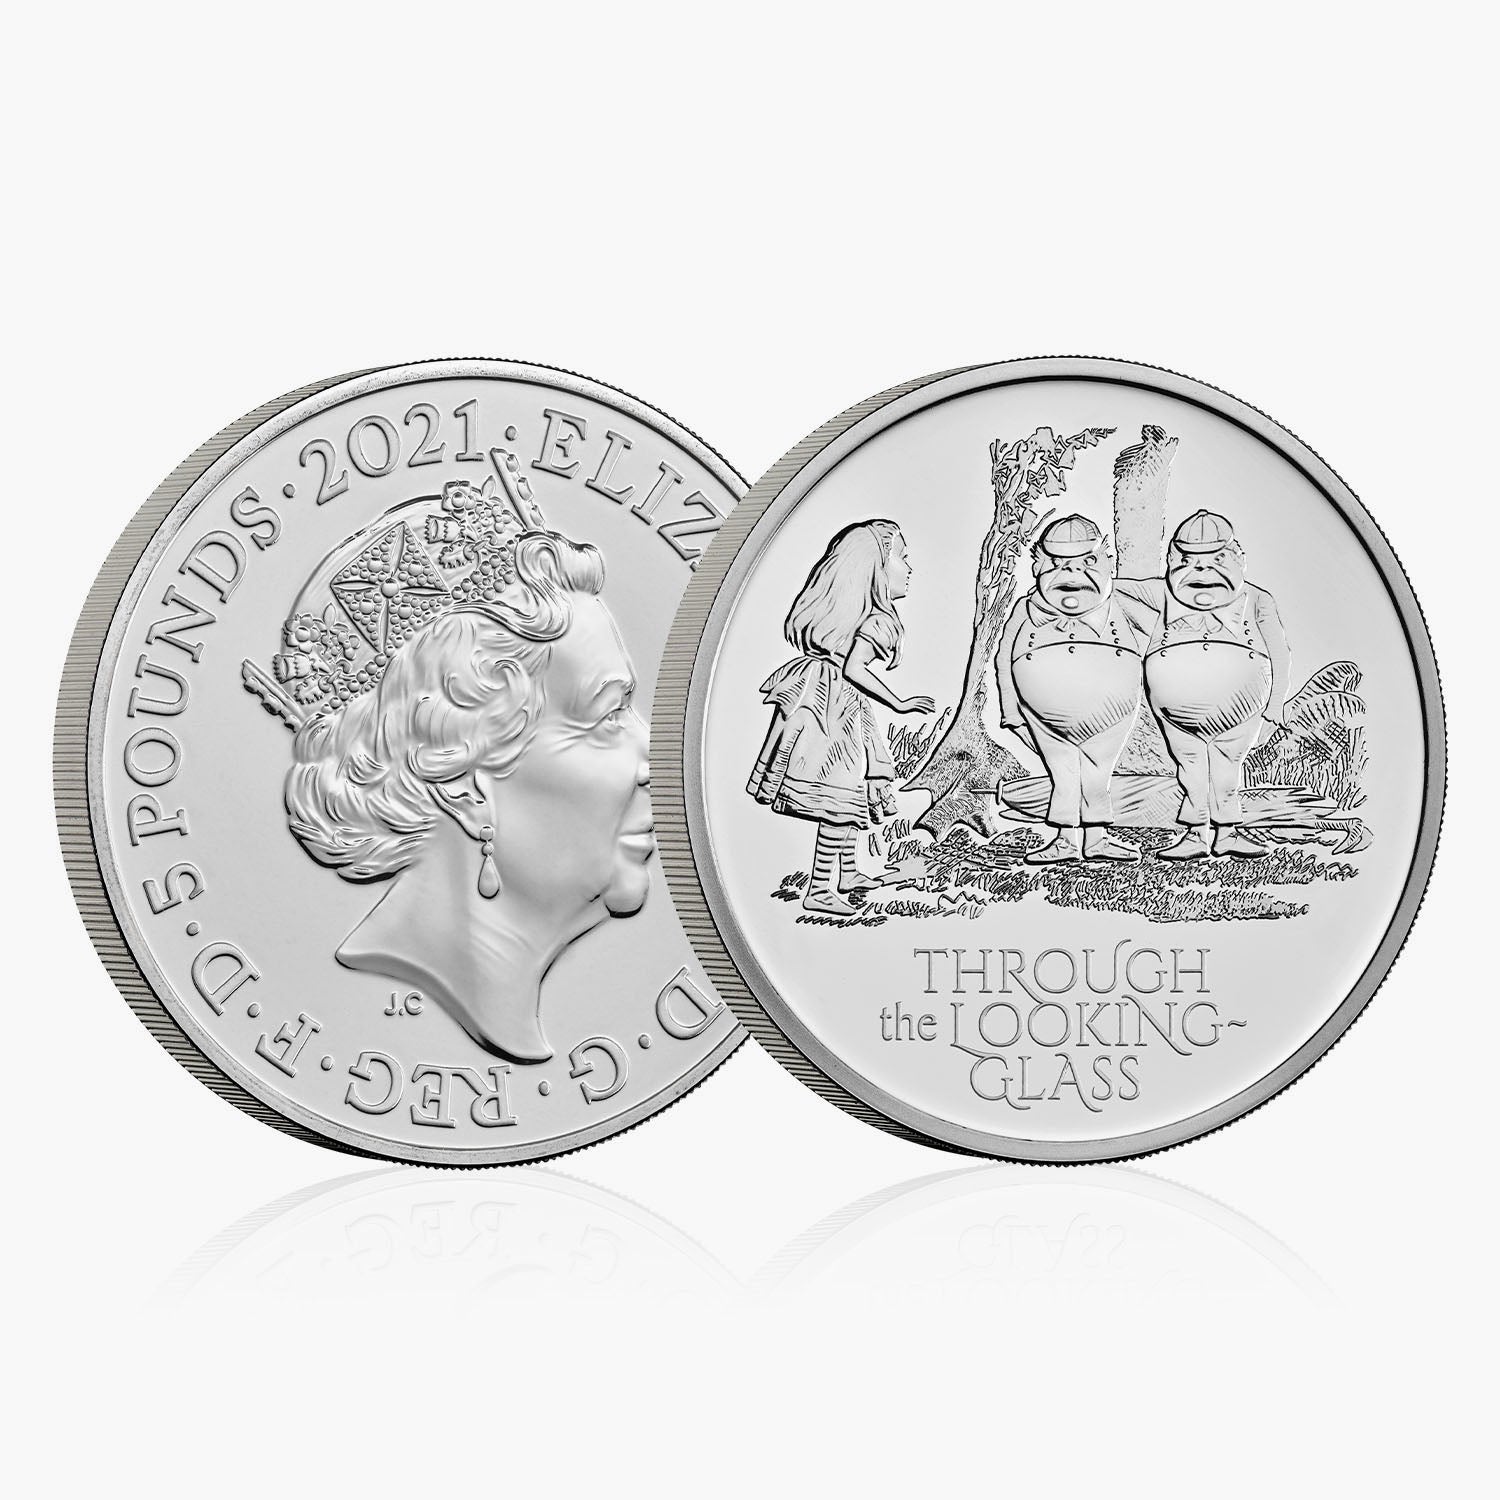 Alice Through the Looking-Glass 2021 UK £5 BU Coin